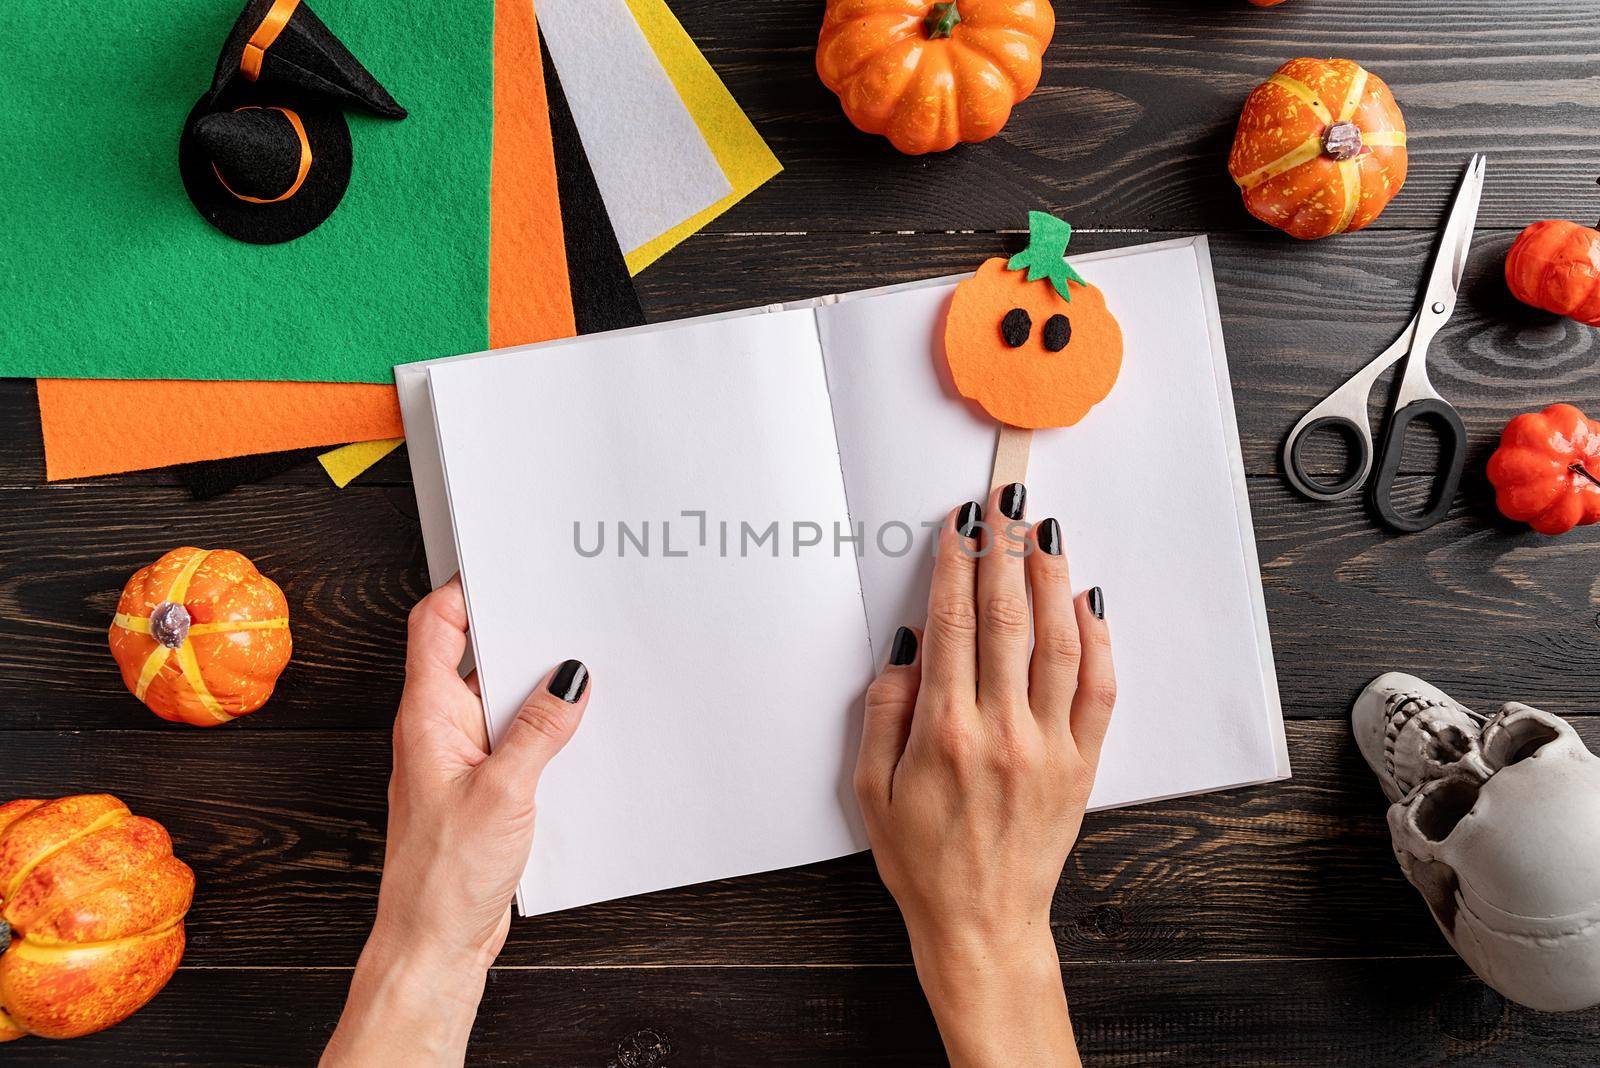 Happy Halloween concept. Making Halloween pumpkin bookmark craft. Woman hands with black nails holding pupmkin bookmark in a blank opened book.